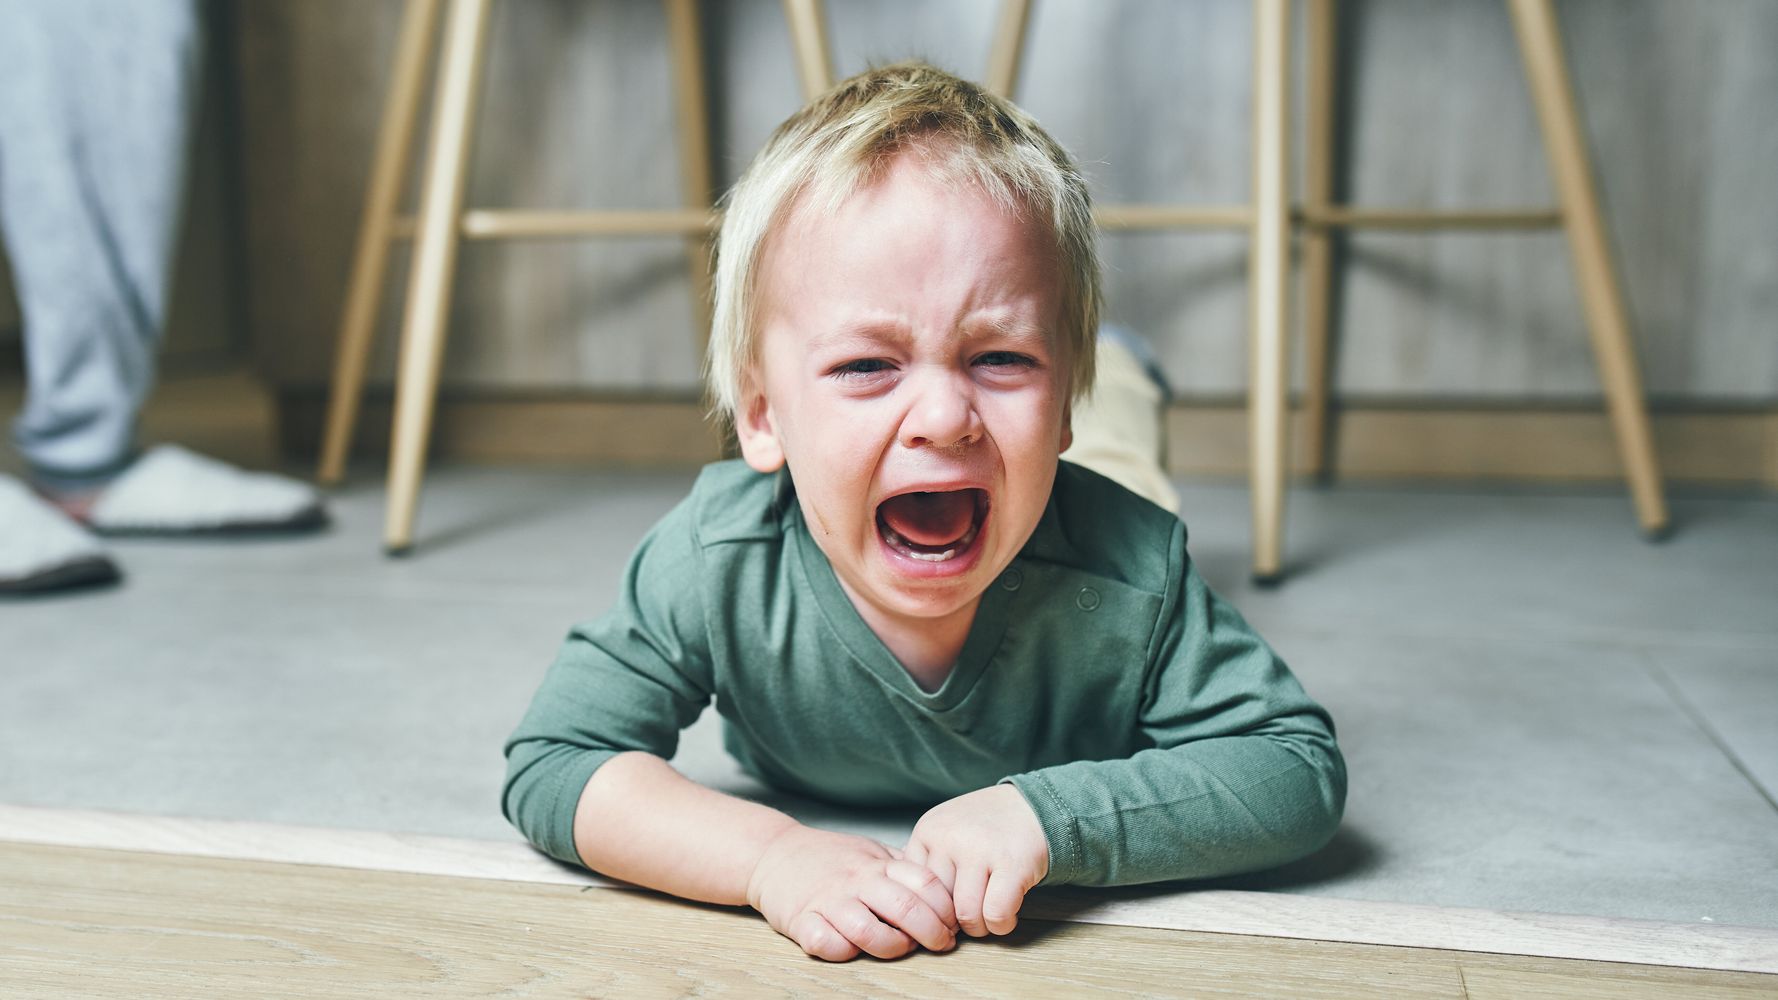 Two Types of Tantrums at Early Childhood